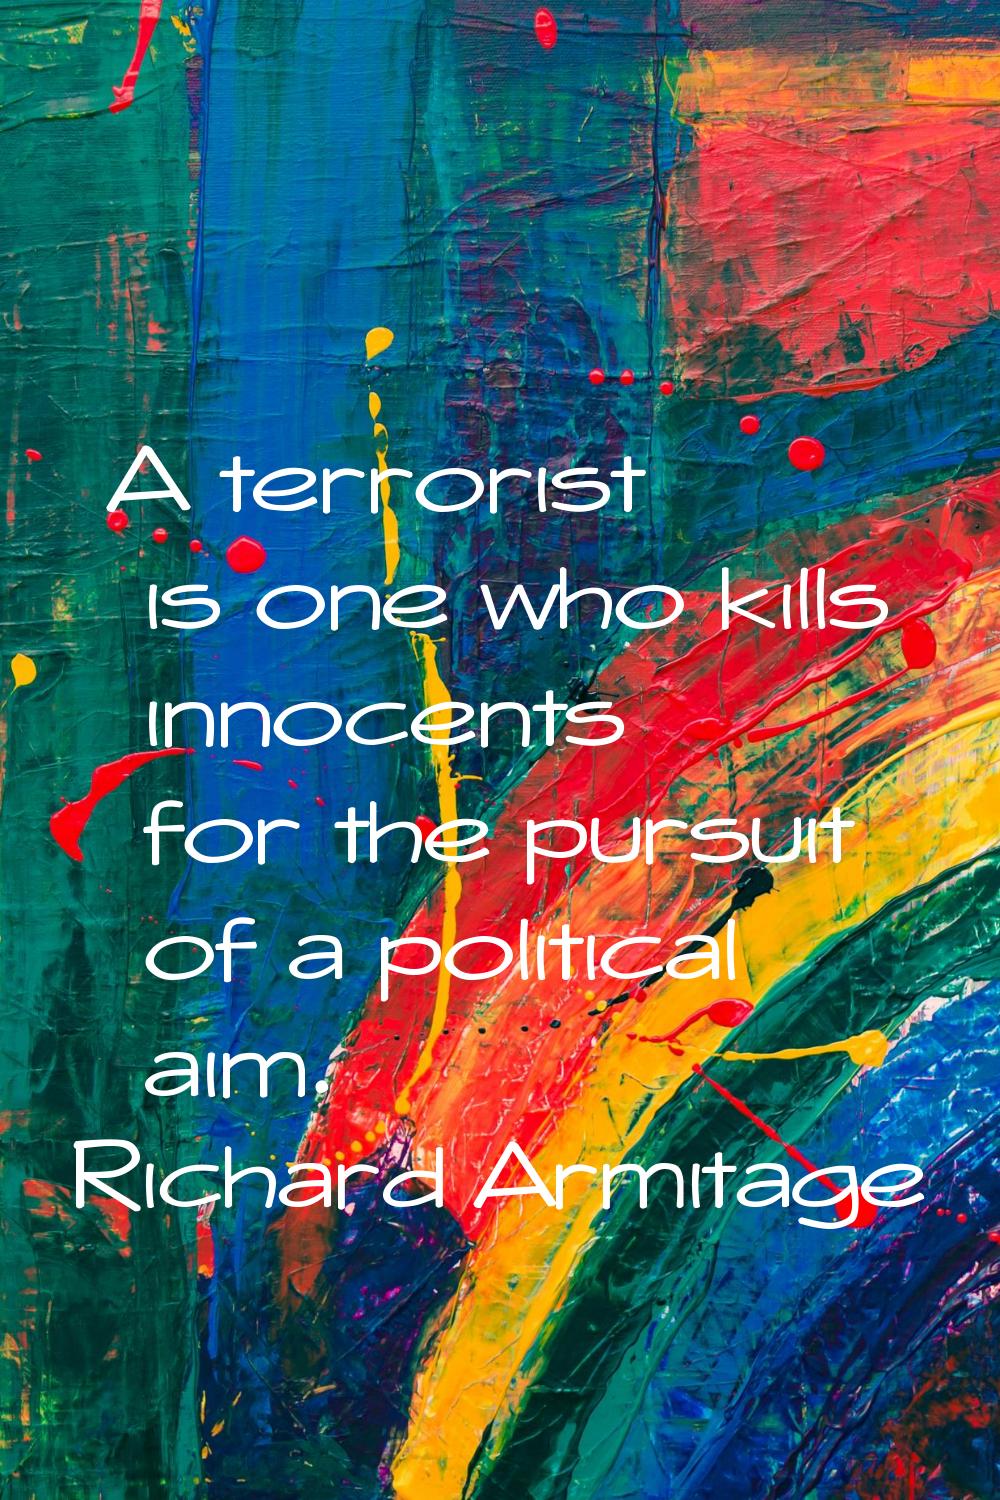 A terrorist is one who kills innocents for the pursuit of a political aim.